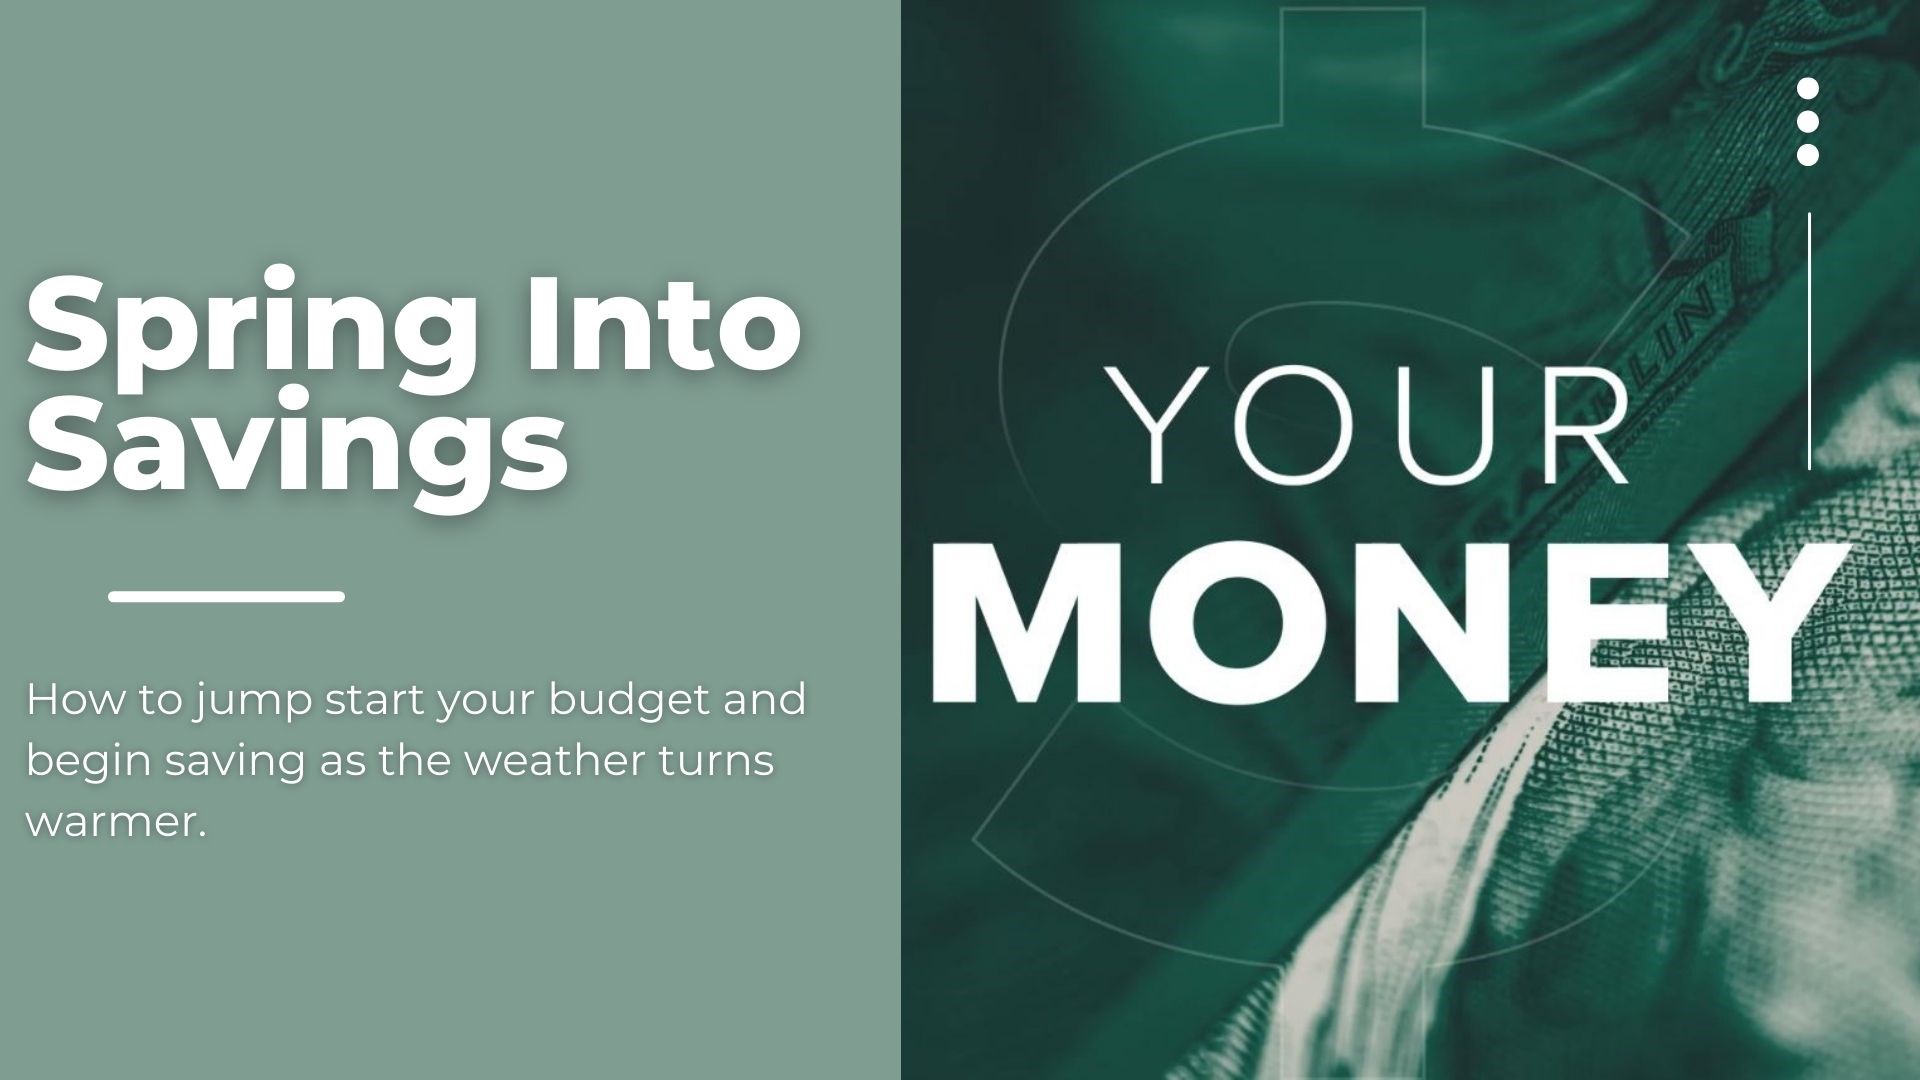 Tips on how to get your budgets in order and to start saving as we head into the warmer months.